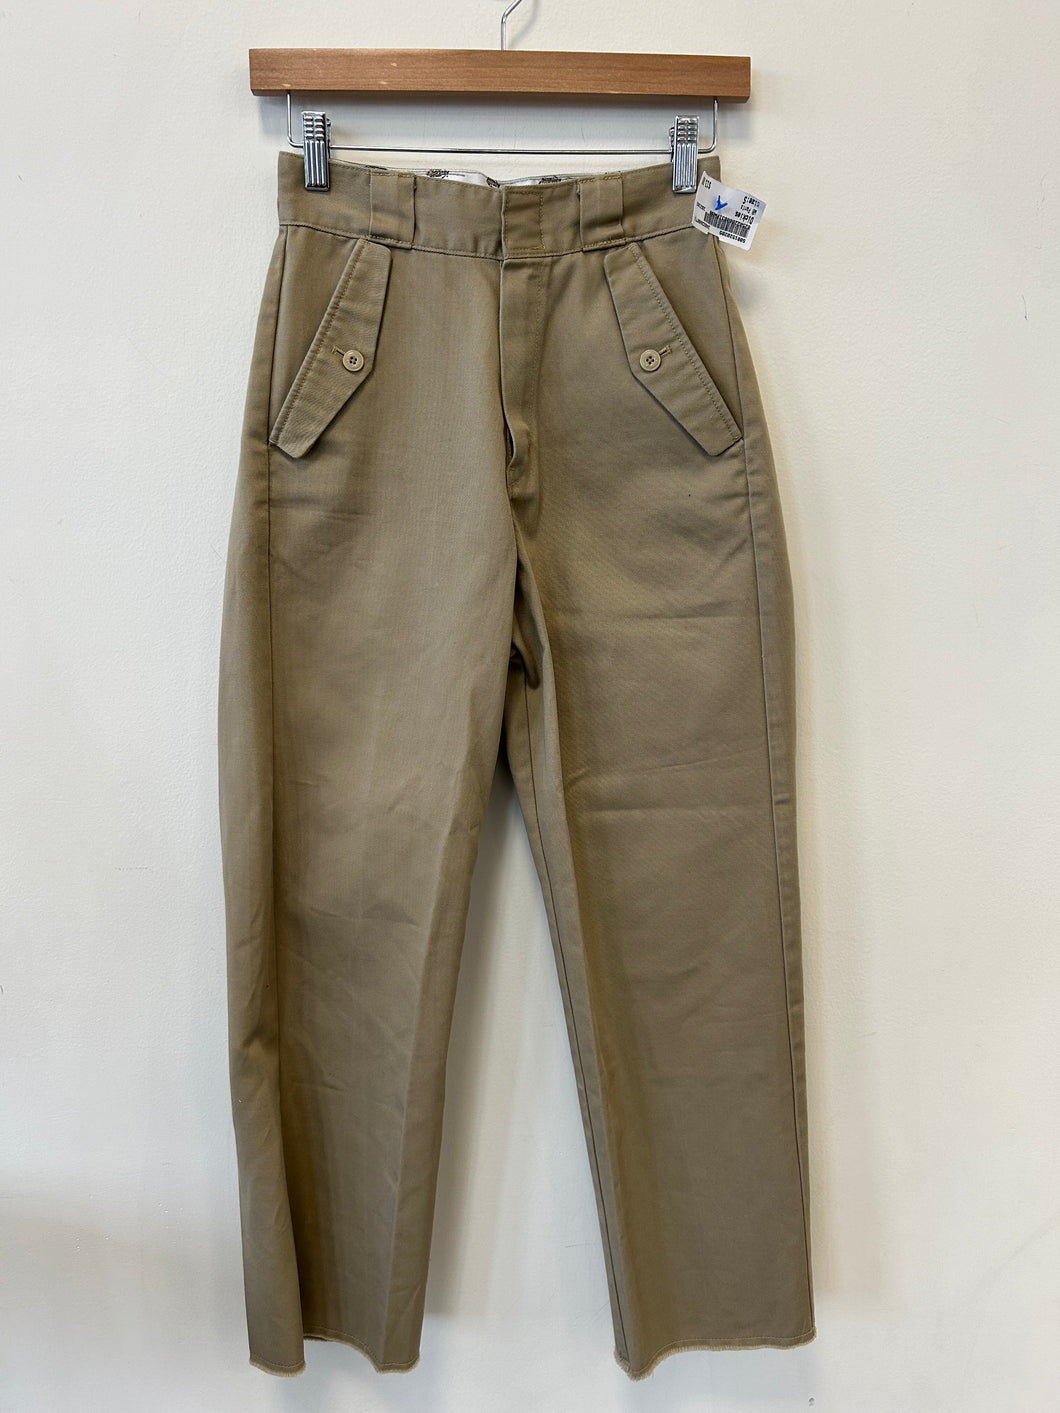 Dickies Pants Size Small